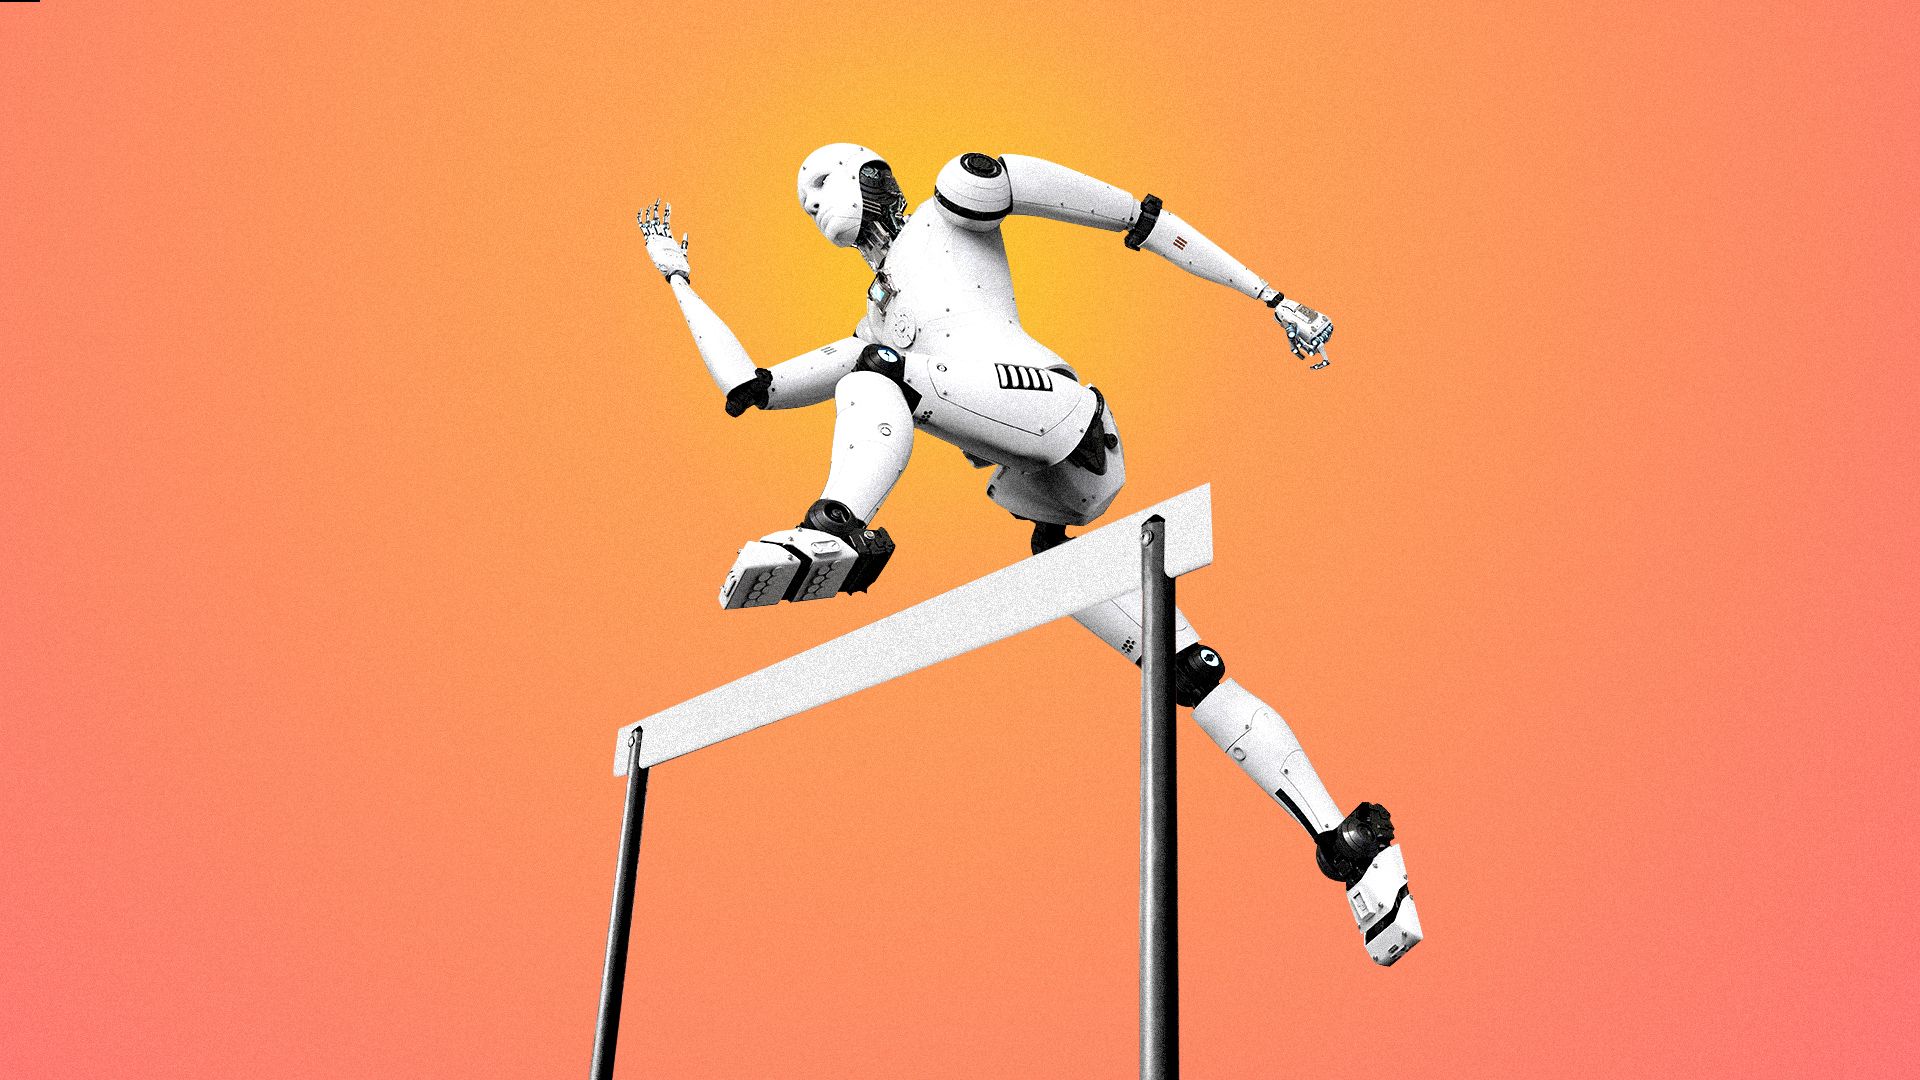 Illustration of a robot jumping over a hurdle 